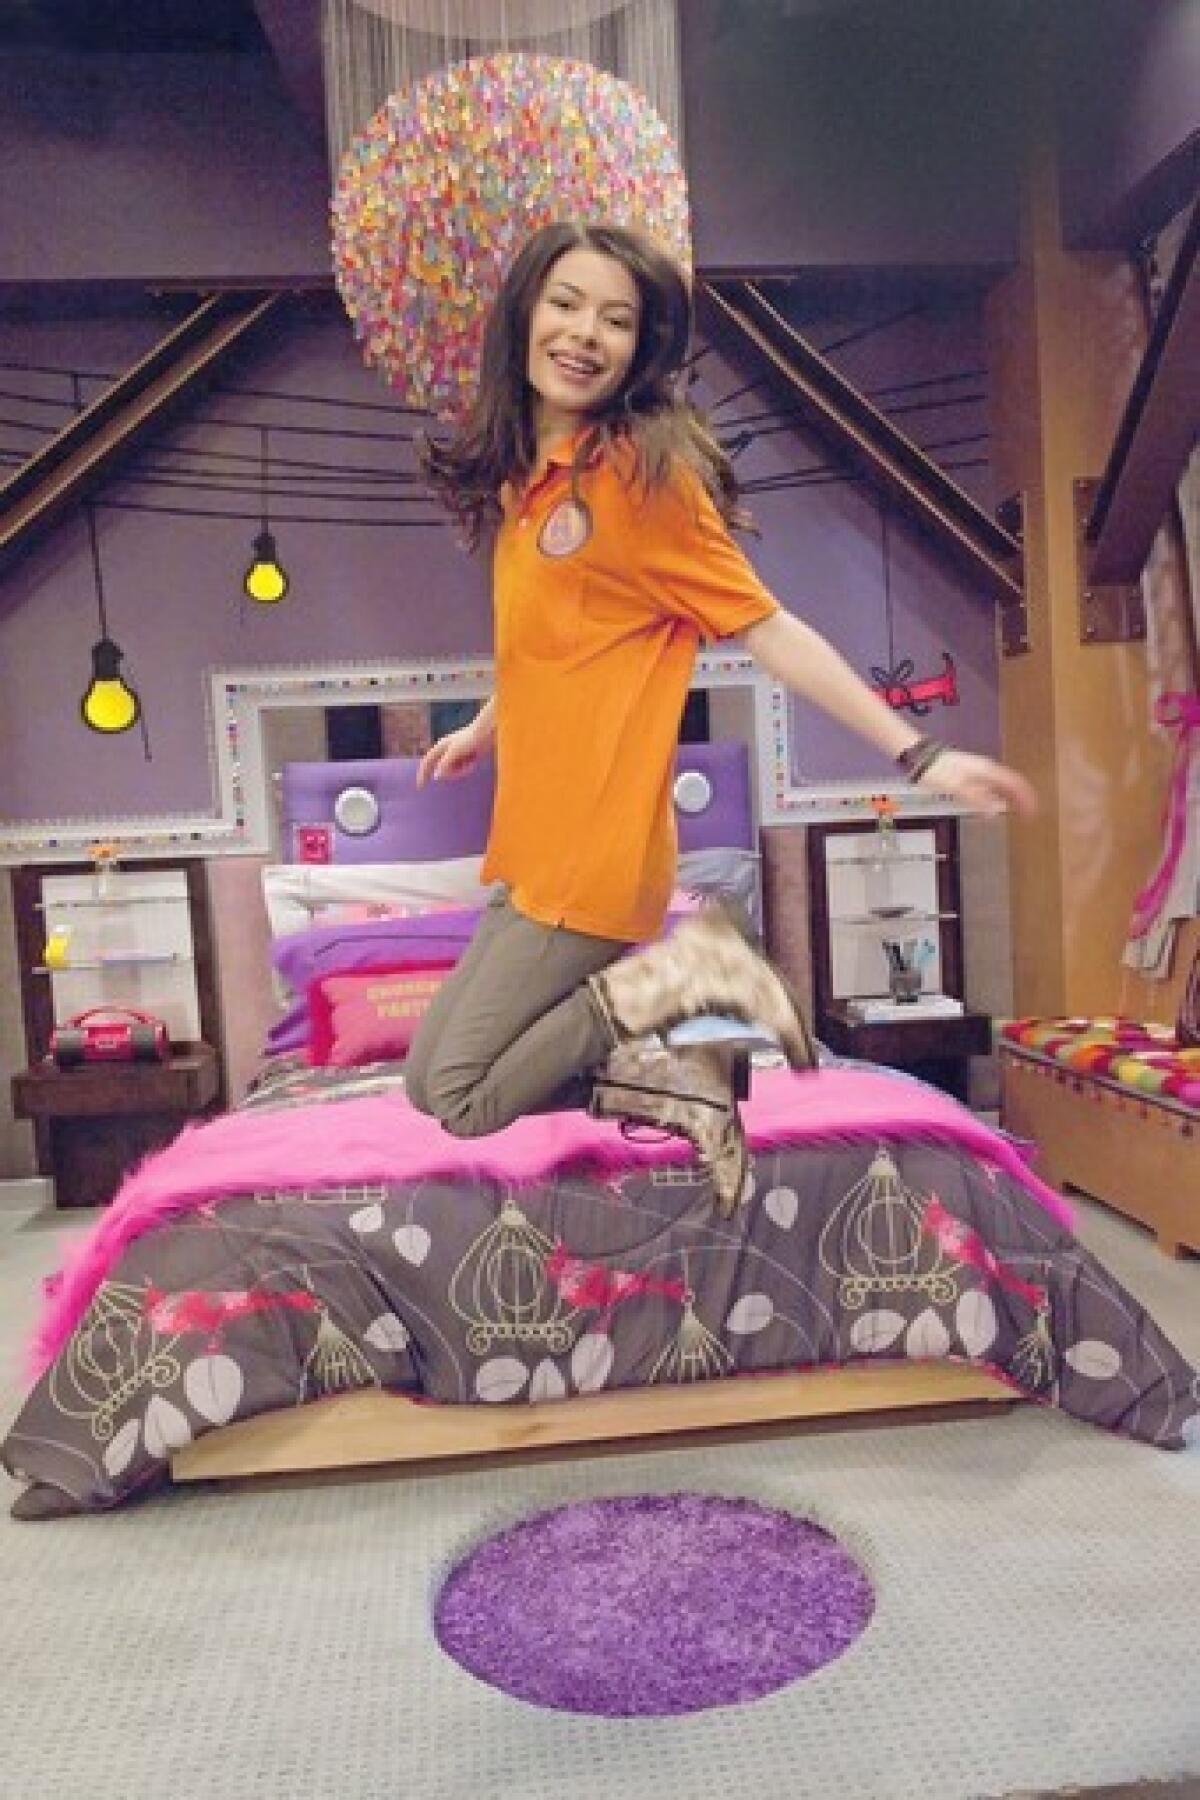 A girl jumps into the air in her brightly colored bedroom